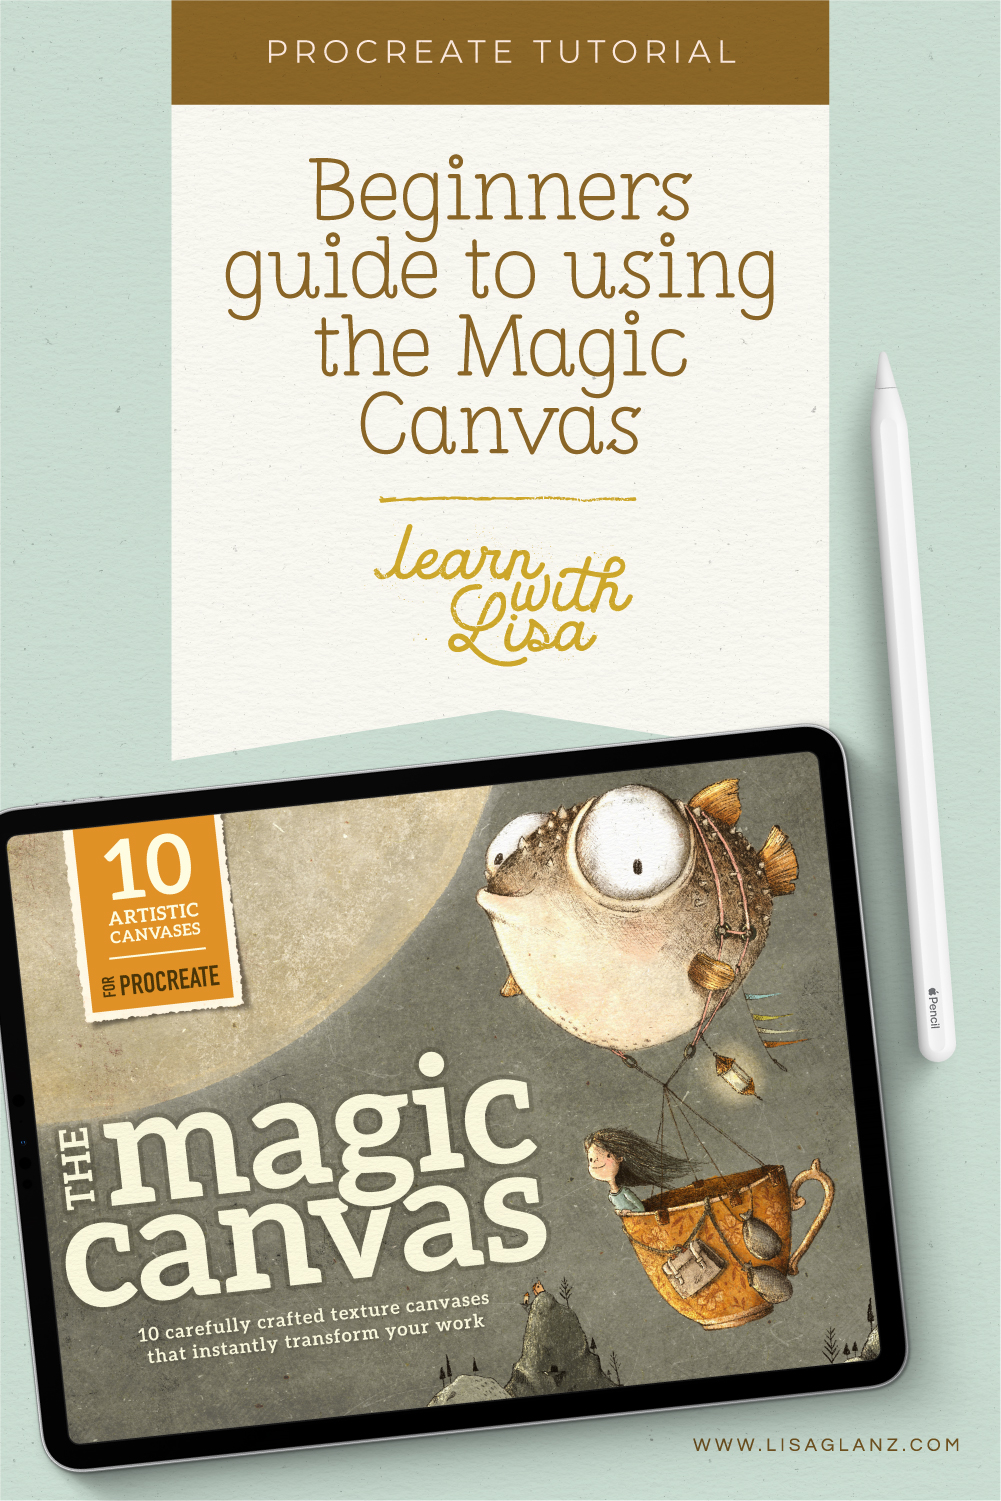 Beginners guide: How to use the Magic Canvas in Procreate